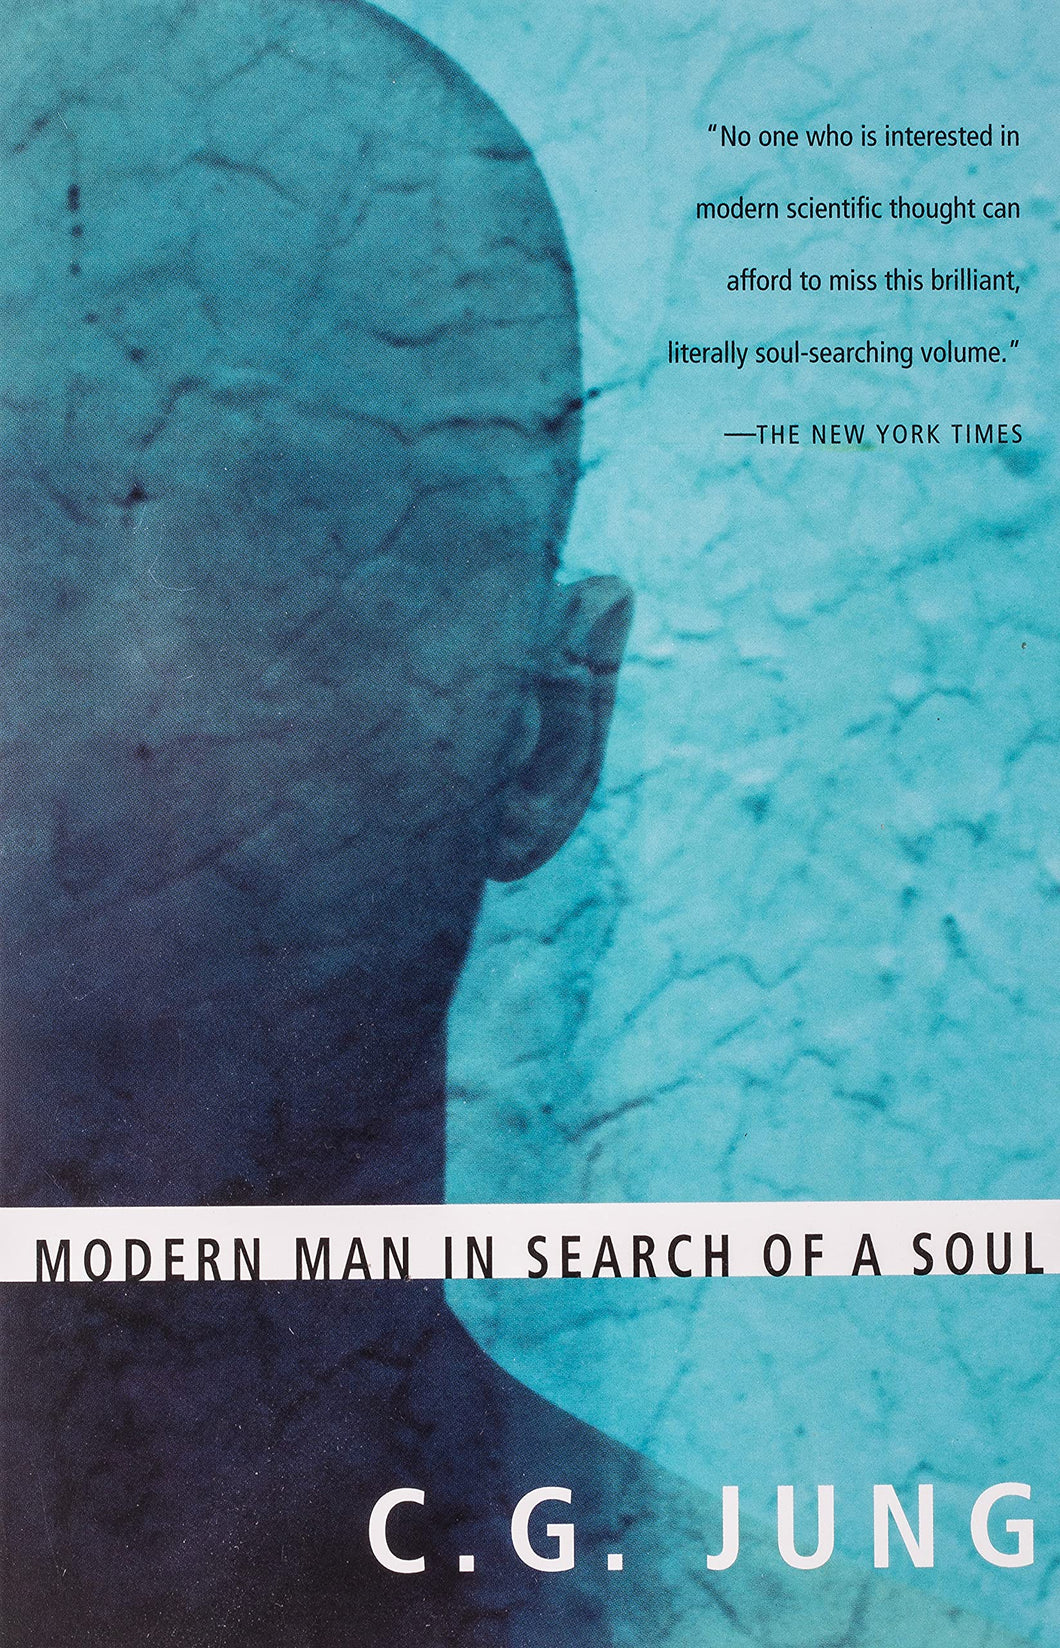 Modern Man In Search of a Soul by Carl Jung